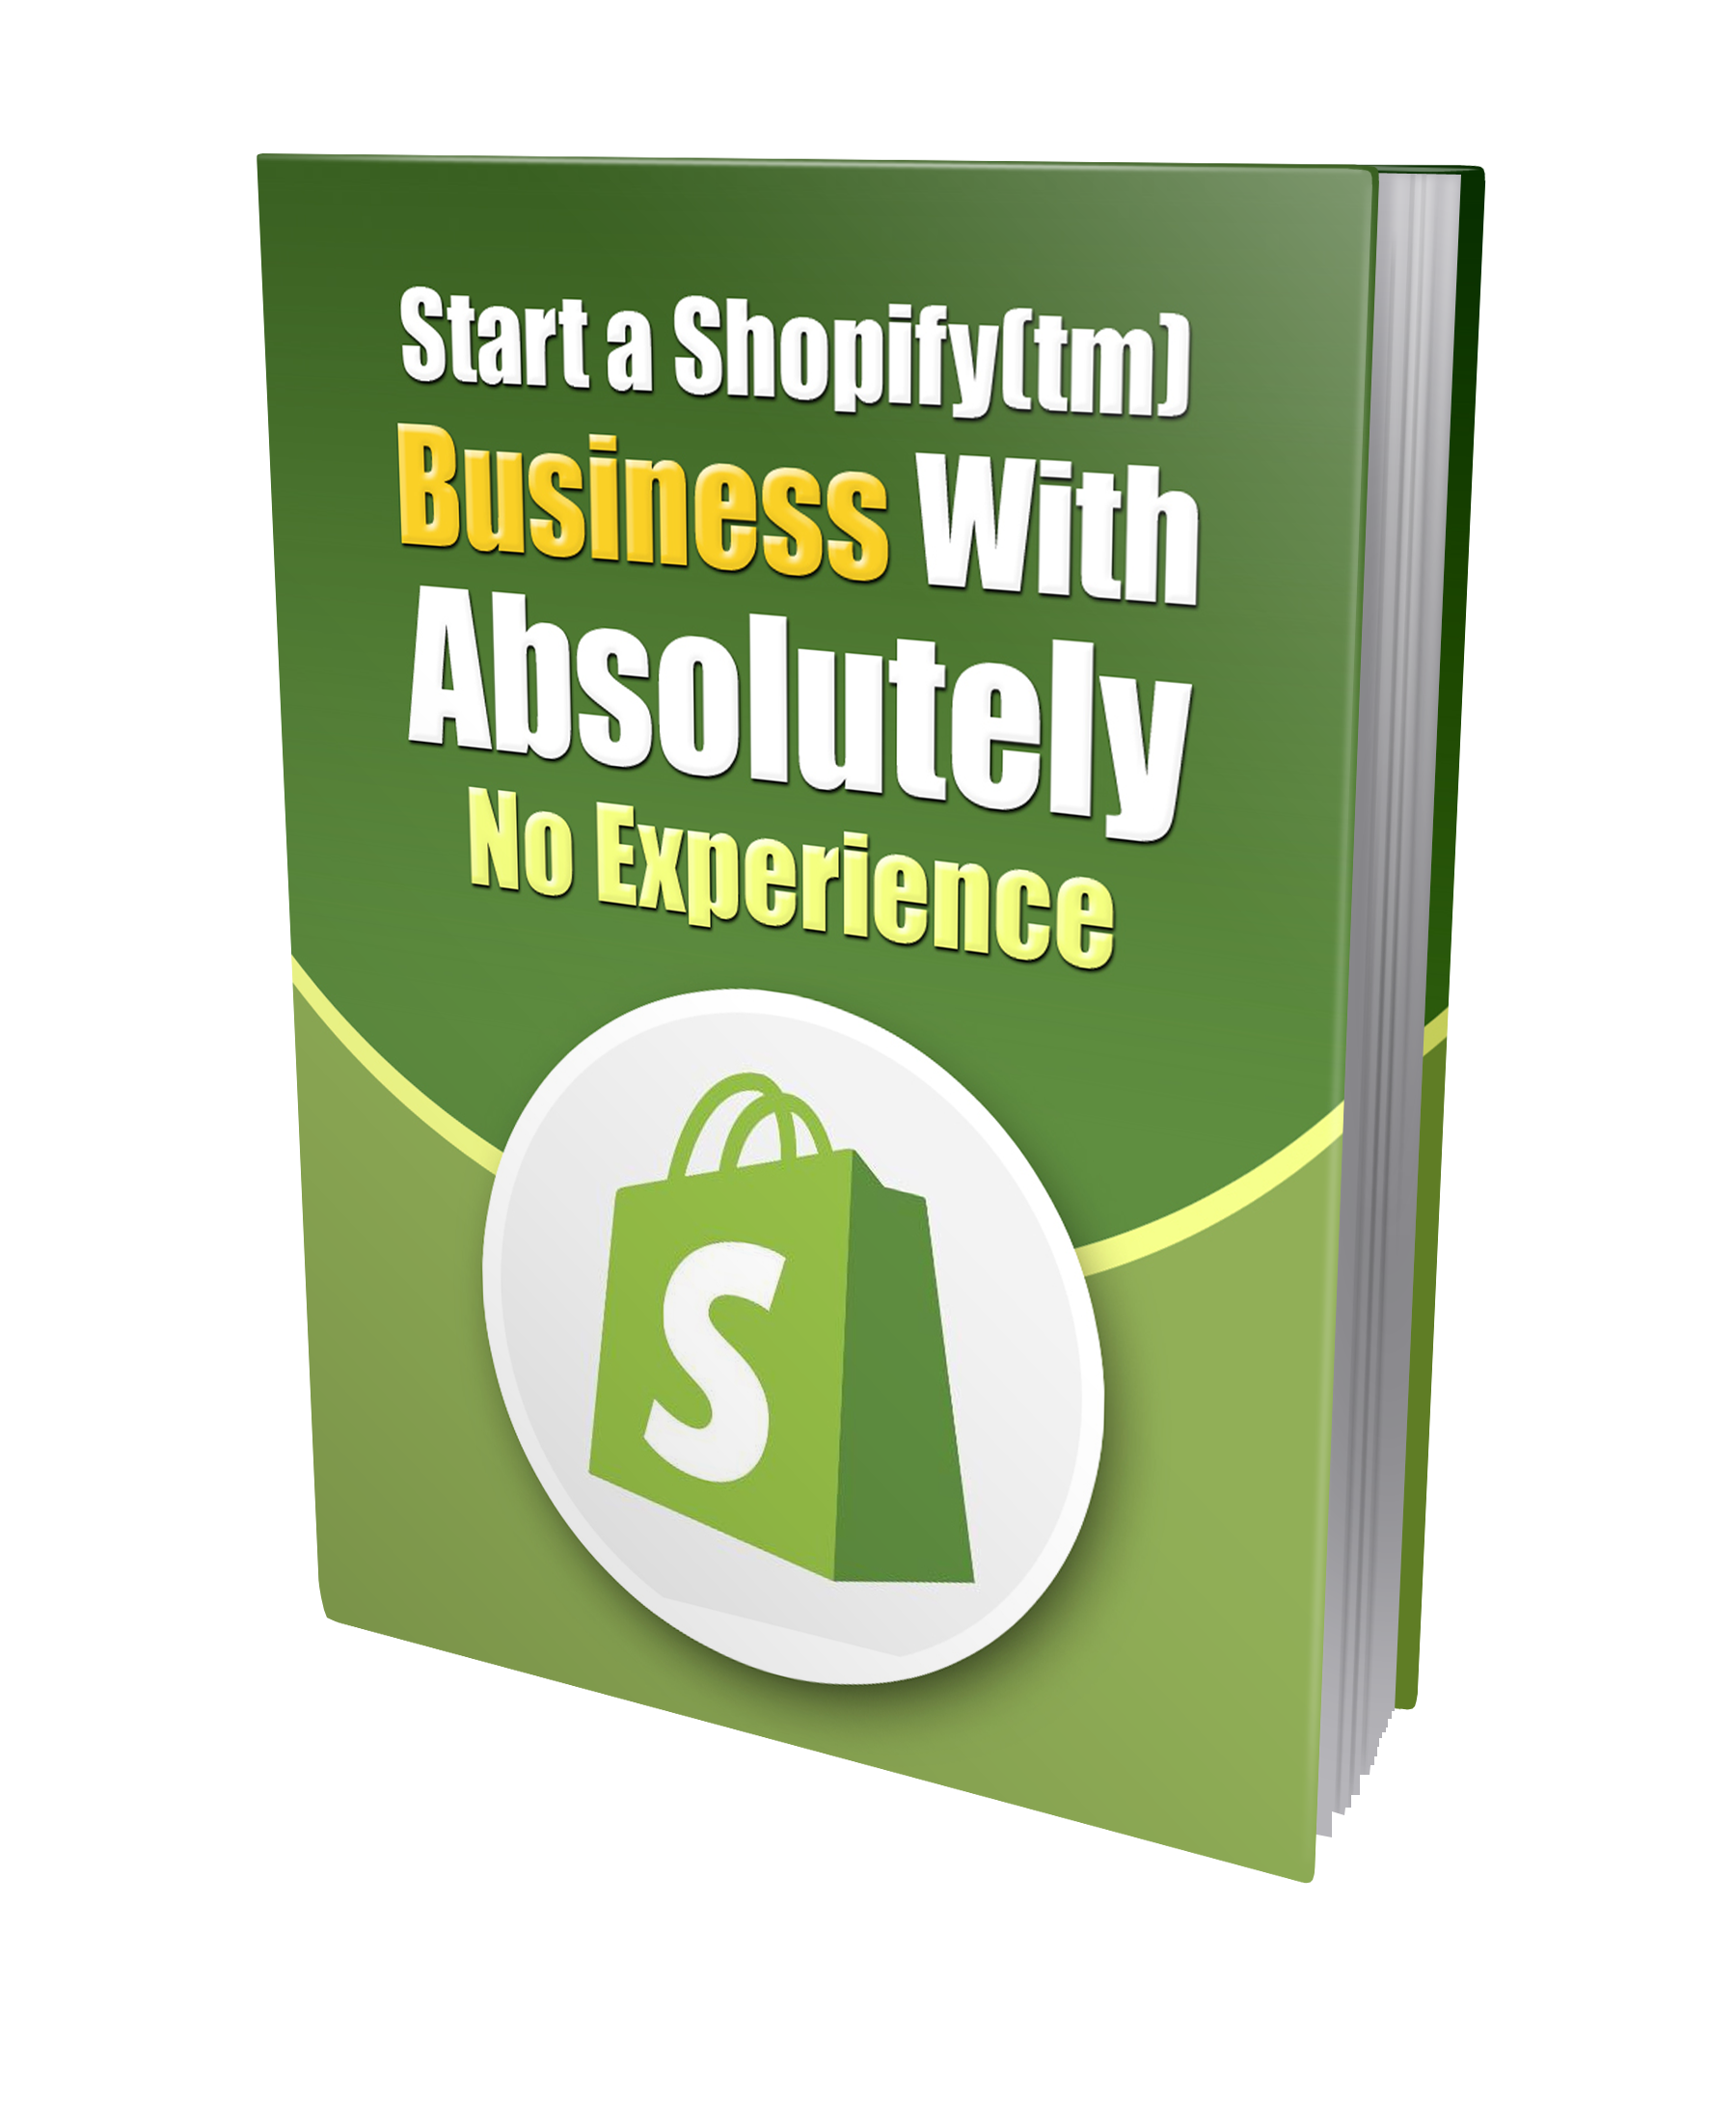 Shopify Simplified Success